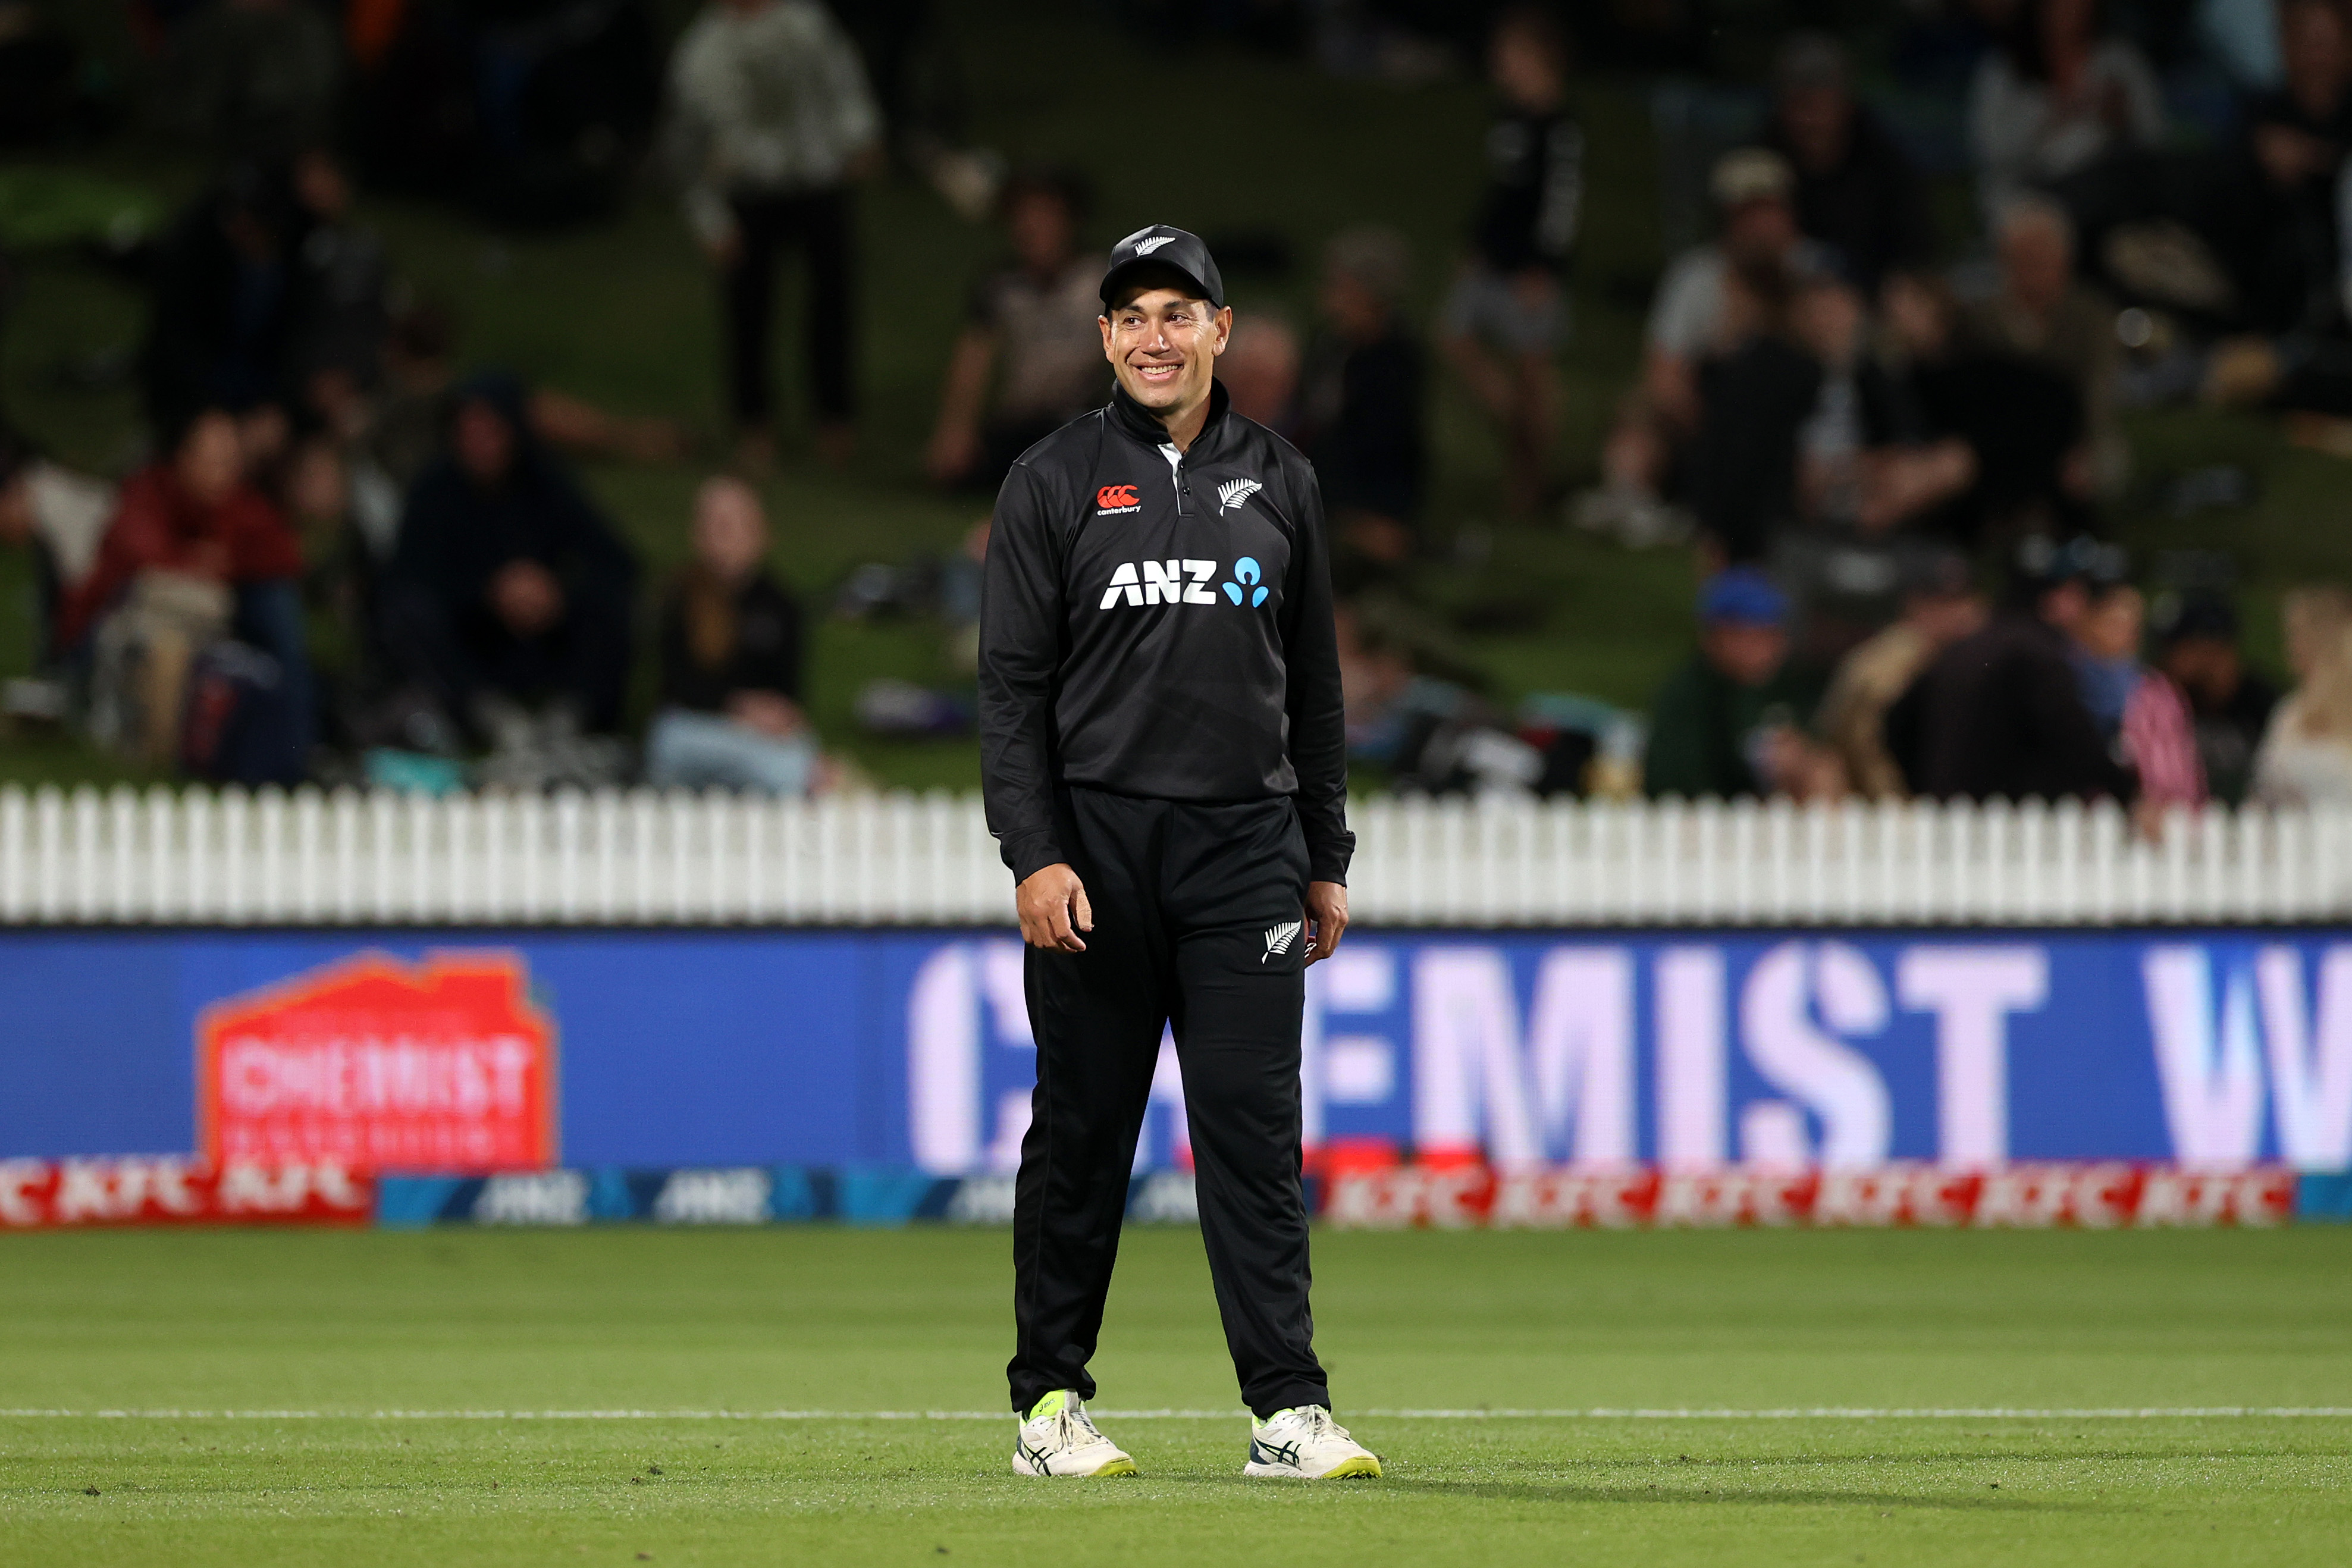 NZ vs BAN | WATCH : Ross Taylor ends his career with a wicket as New Zealand beat Bangladesh by an innings and 117 runs